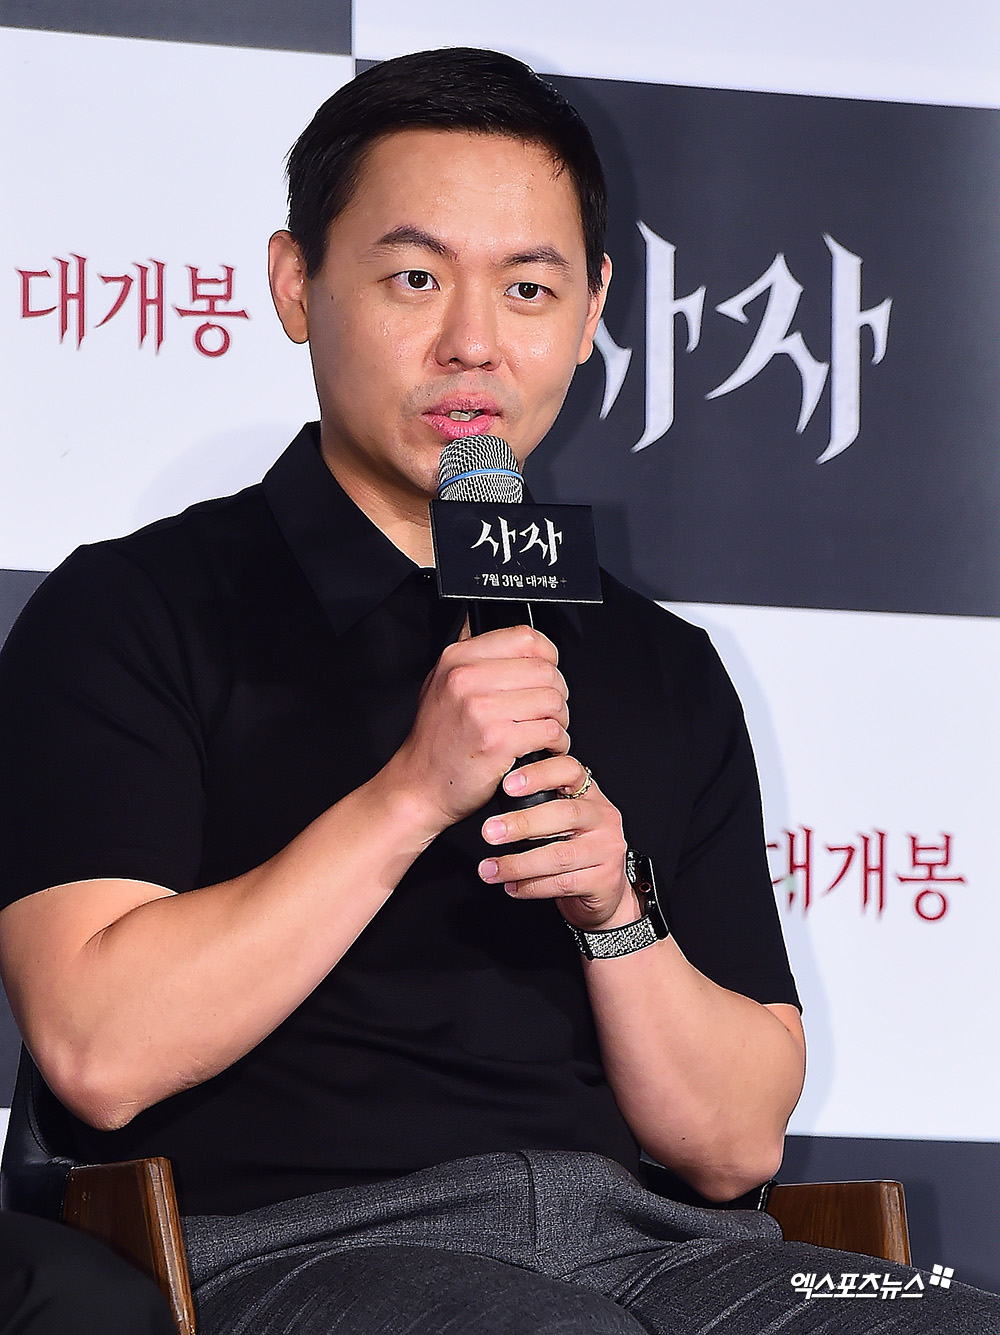 Lion director Kim Joo-hwan told the story of receiving favorable reviews from his long-time fan Constantine Frances Lawrence.The movie Lion (director Kim Joo-hwan) premiered at the entrance of Lotte Cinema Counter in Gwangjin-gu, Seoul on the 22nd.Actor Park Seo-joon, Ahn Sung-ki, Udohwan and Kim Joo-hwan attended the meeting to talk about the movie.The Lion is a story about fighting champion Yonghu (Park Seo-joon) meeting with the Guma priest Anshinbu (Ahn Sung-ki) and confronting the powerful evil (), which has left the world in turmoil.Park Seo-joon and Ahn Sung-ki played the role of Yonghu and Anshin, respectively, and Udohwan was divided into the black bishop Jishin station spreading evil.On the morning of the morning, Lion revealed the surprise meeting between director Kim Joo-hwan and director Frances Lawrence, and conveyed the reaction of director Frances Lawrence who had seen Lion in advance.First, Frances Lawrence said, I was truly fascinated by the Lion, with a warm echo that I had not expected when I saw the trailer, and a bold and brilliant imagination.The experience was so intense that I felt a deep regret on my way home from the movie. Especially, about the colorful attractions with fantasy settings, Actors Acting was very good, Misengsen was beautiful, and visuals made a strong impression.I think I saw the birth of a very attractive hero who is expecting stories to unfold.Director Kim Joo-hwan said, I only met Director Frances Lawrence 24 hours ago. (I saw the movie) I was choked.He praised him for picking up good quality from a relatively small budget or roundabout, and said he would like to invite him to Korea if he takes this series. Kim also said, The directors secretary watched the movie together and it was like Lion Gosling in the East.My age of directors grew up watching a movie called Constantine like a mania, he said.When I was preparing for the movie, I wanted to create a world view that parallels good and evil. As a fan of the director, I said I would run if the meeting was concluded.Im glad to see you and hear your praise. The Lion will be released on the 31st.Photo = DB